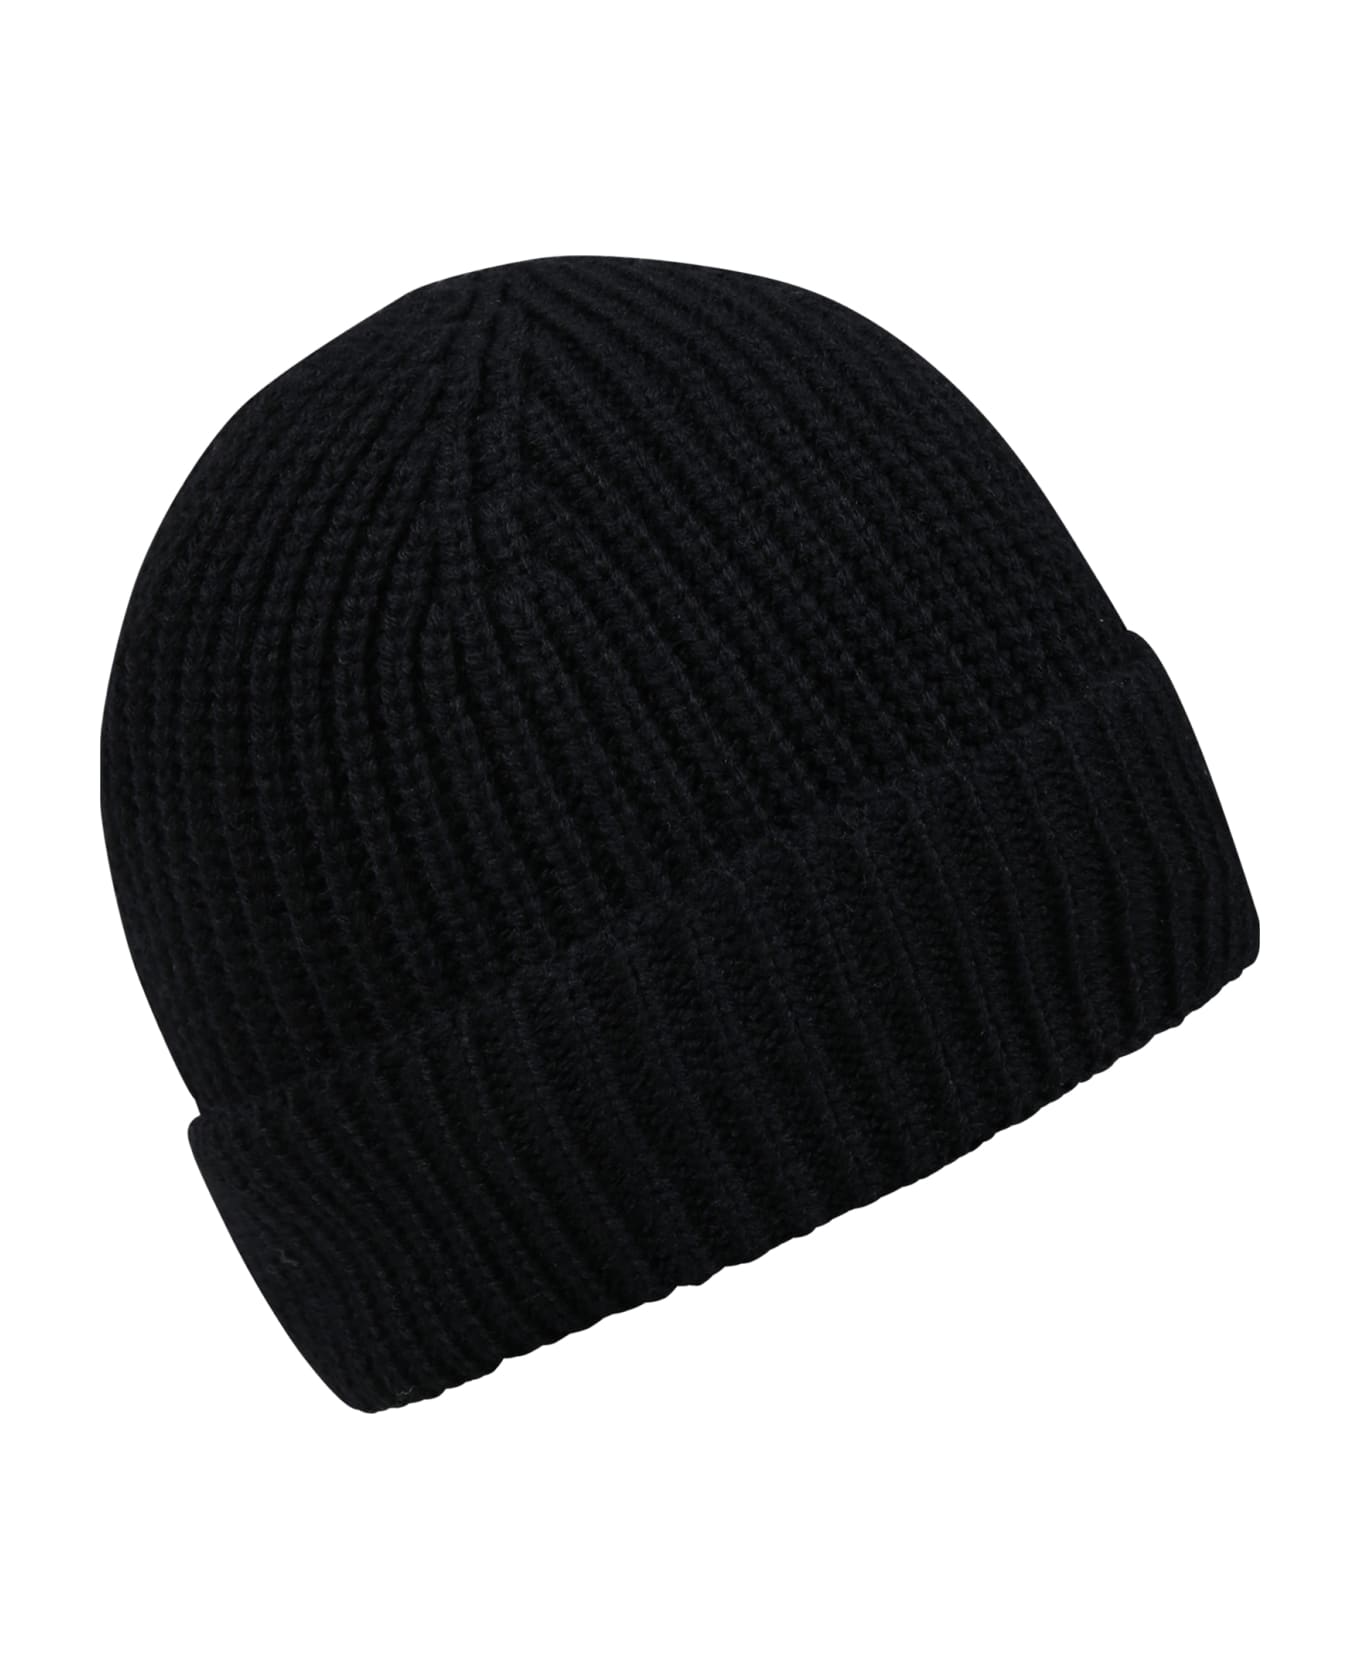 Barrow Black Hat For Kids With Smiley - Nero